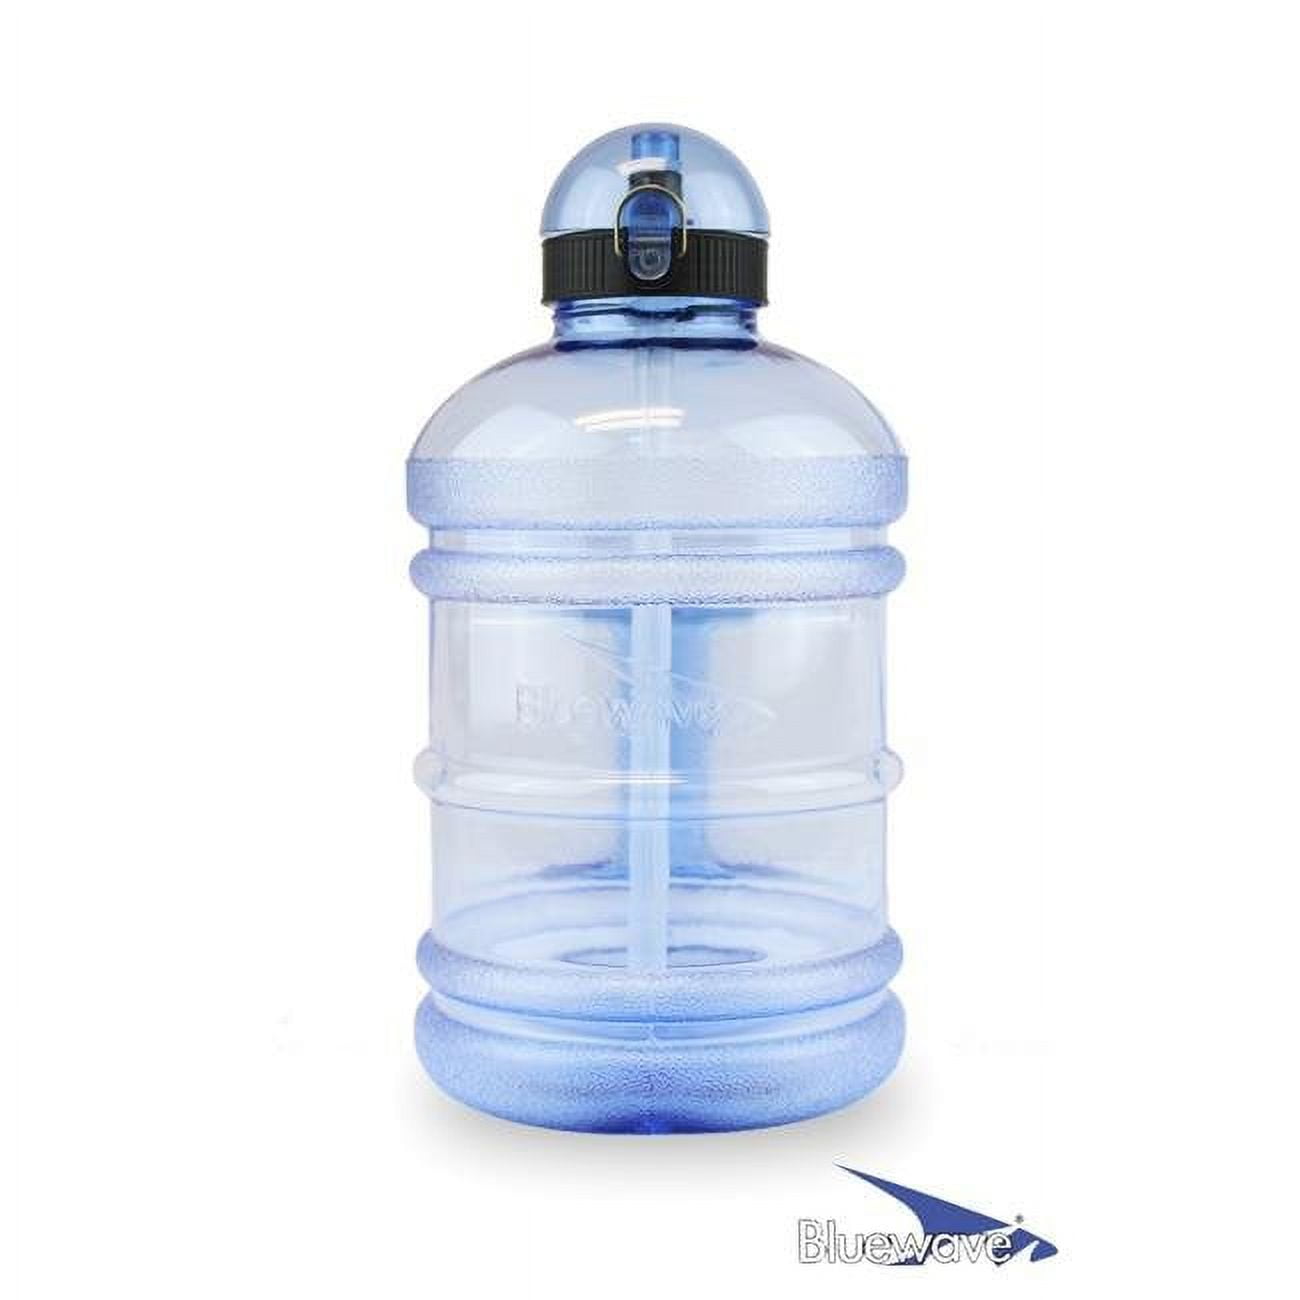 Picture of Bluewave Lifestyle PK19LH-55-Blue Bluewave Daily 8 BPA Free Reusable Water Jug - 64 oz., Sky Blue